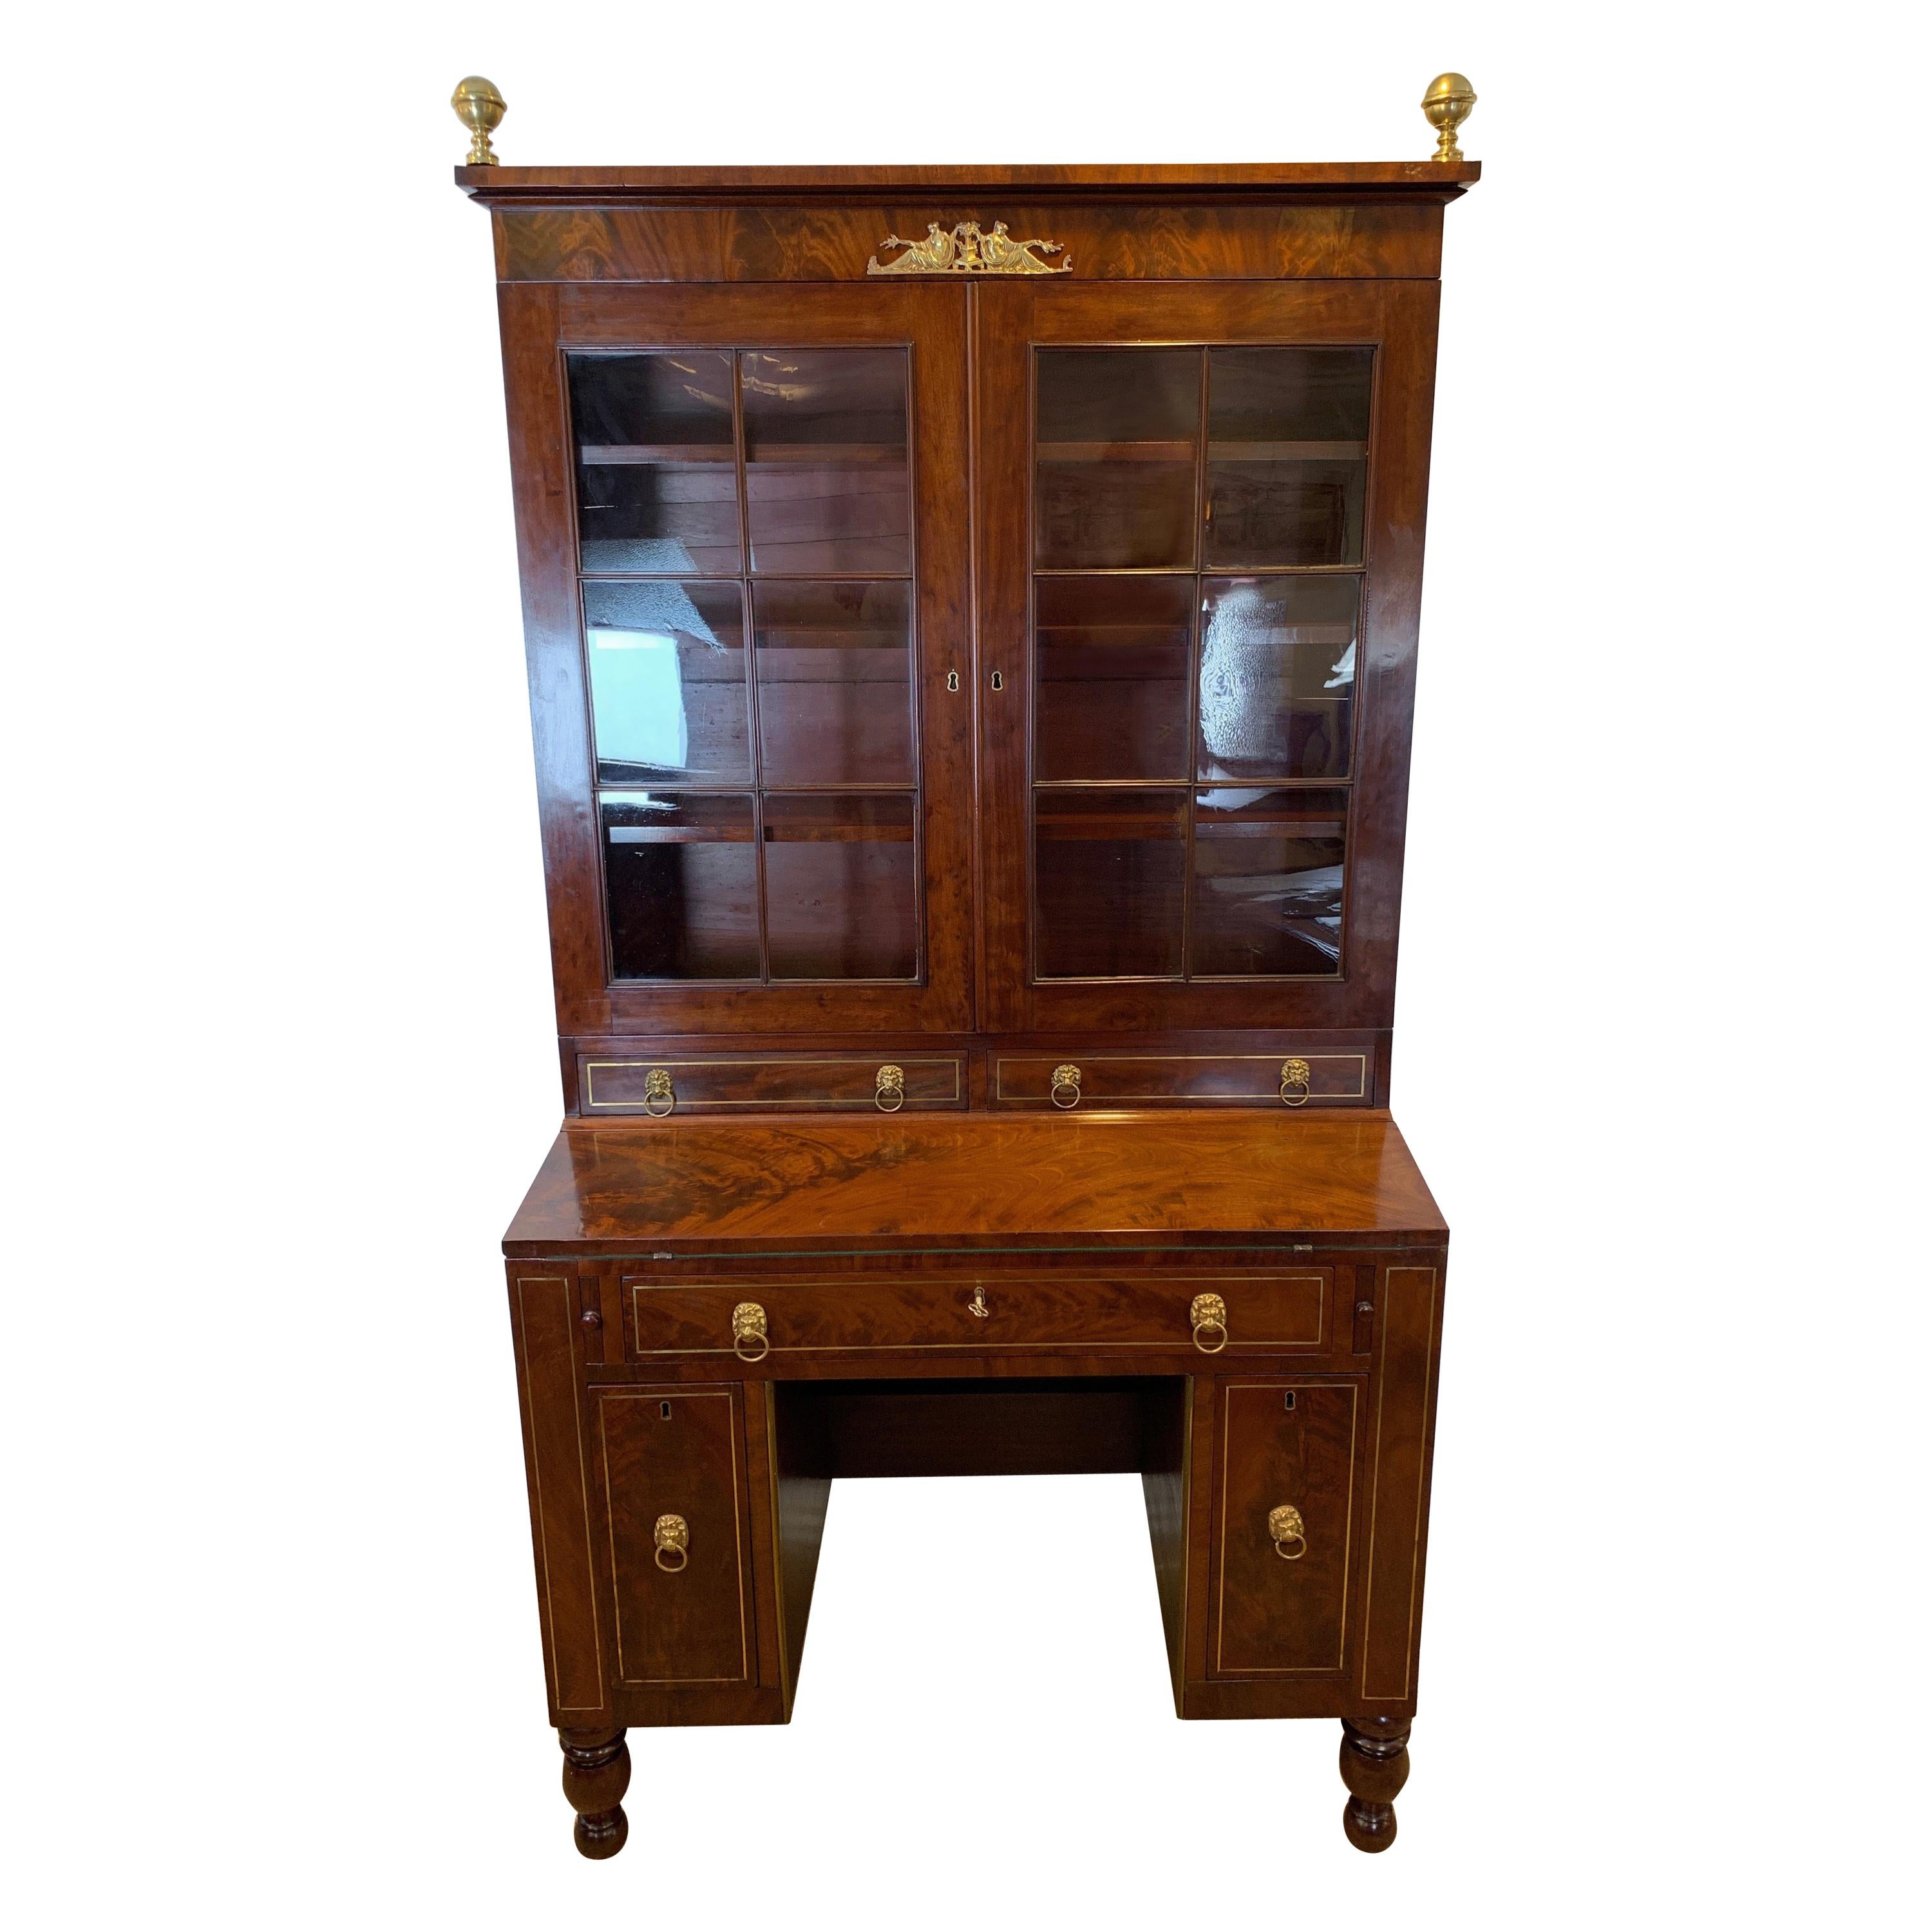 Late Federal Desk and Bookcase in Walnut with Brass Inlay, 1820-1830